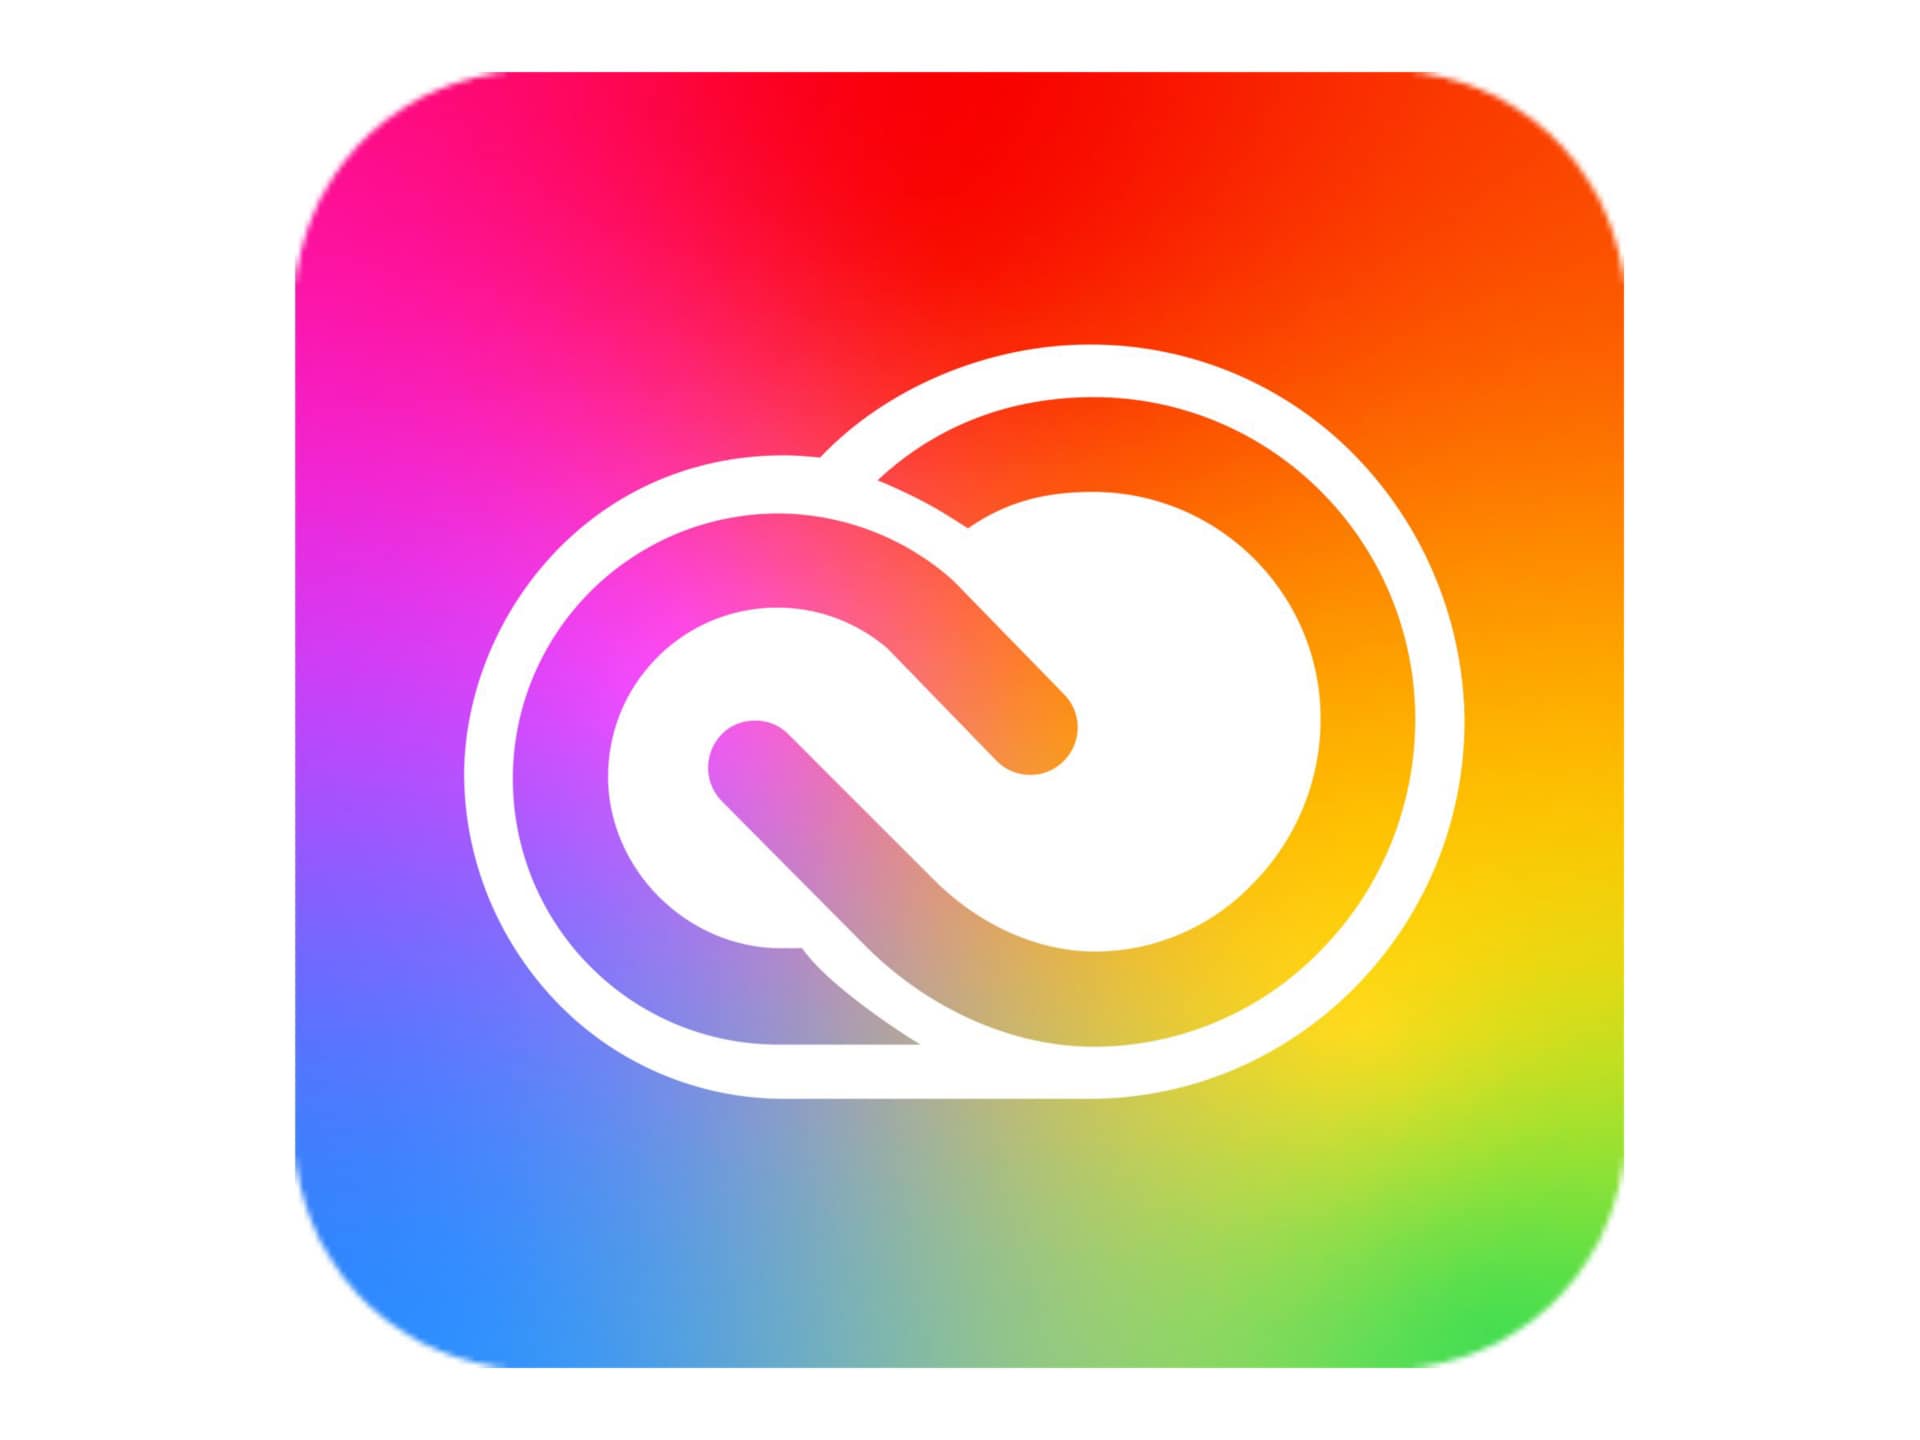 Adobe Creative Cloud for Enterprise - All Apps - Subscription New (4 years) - 1 device